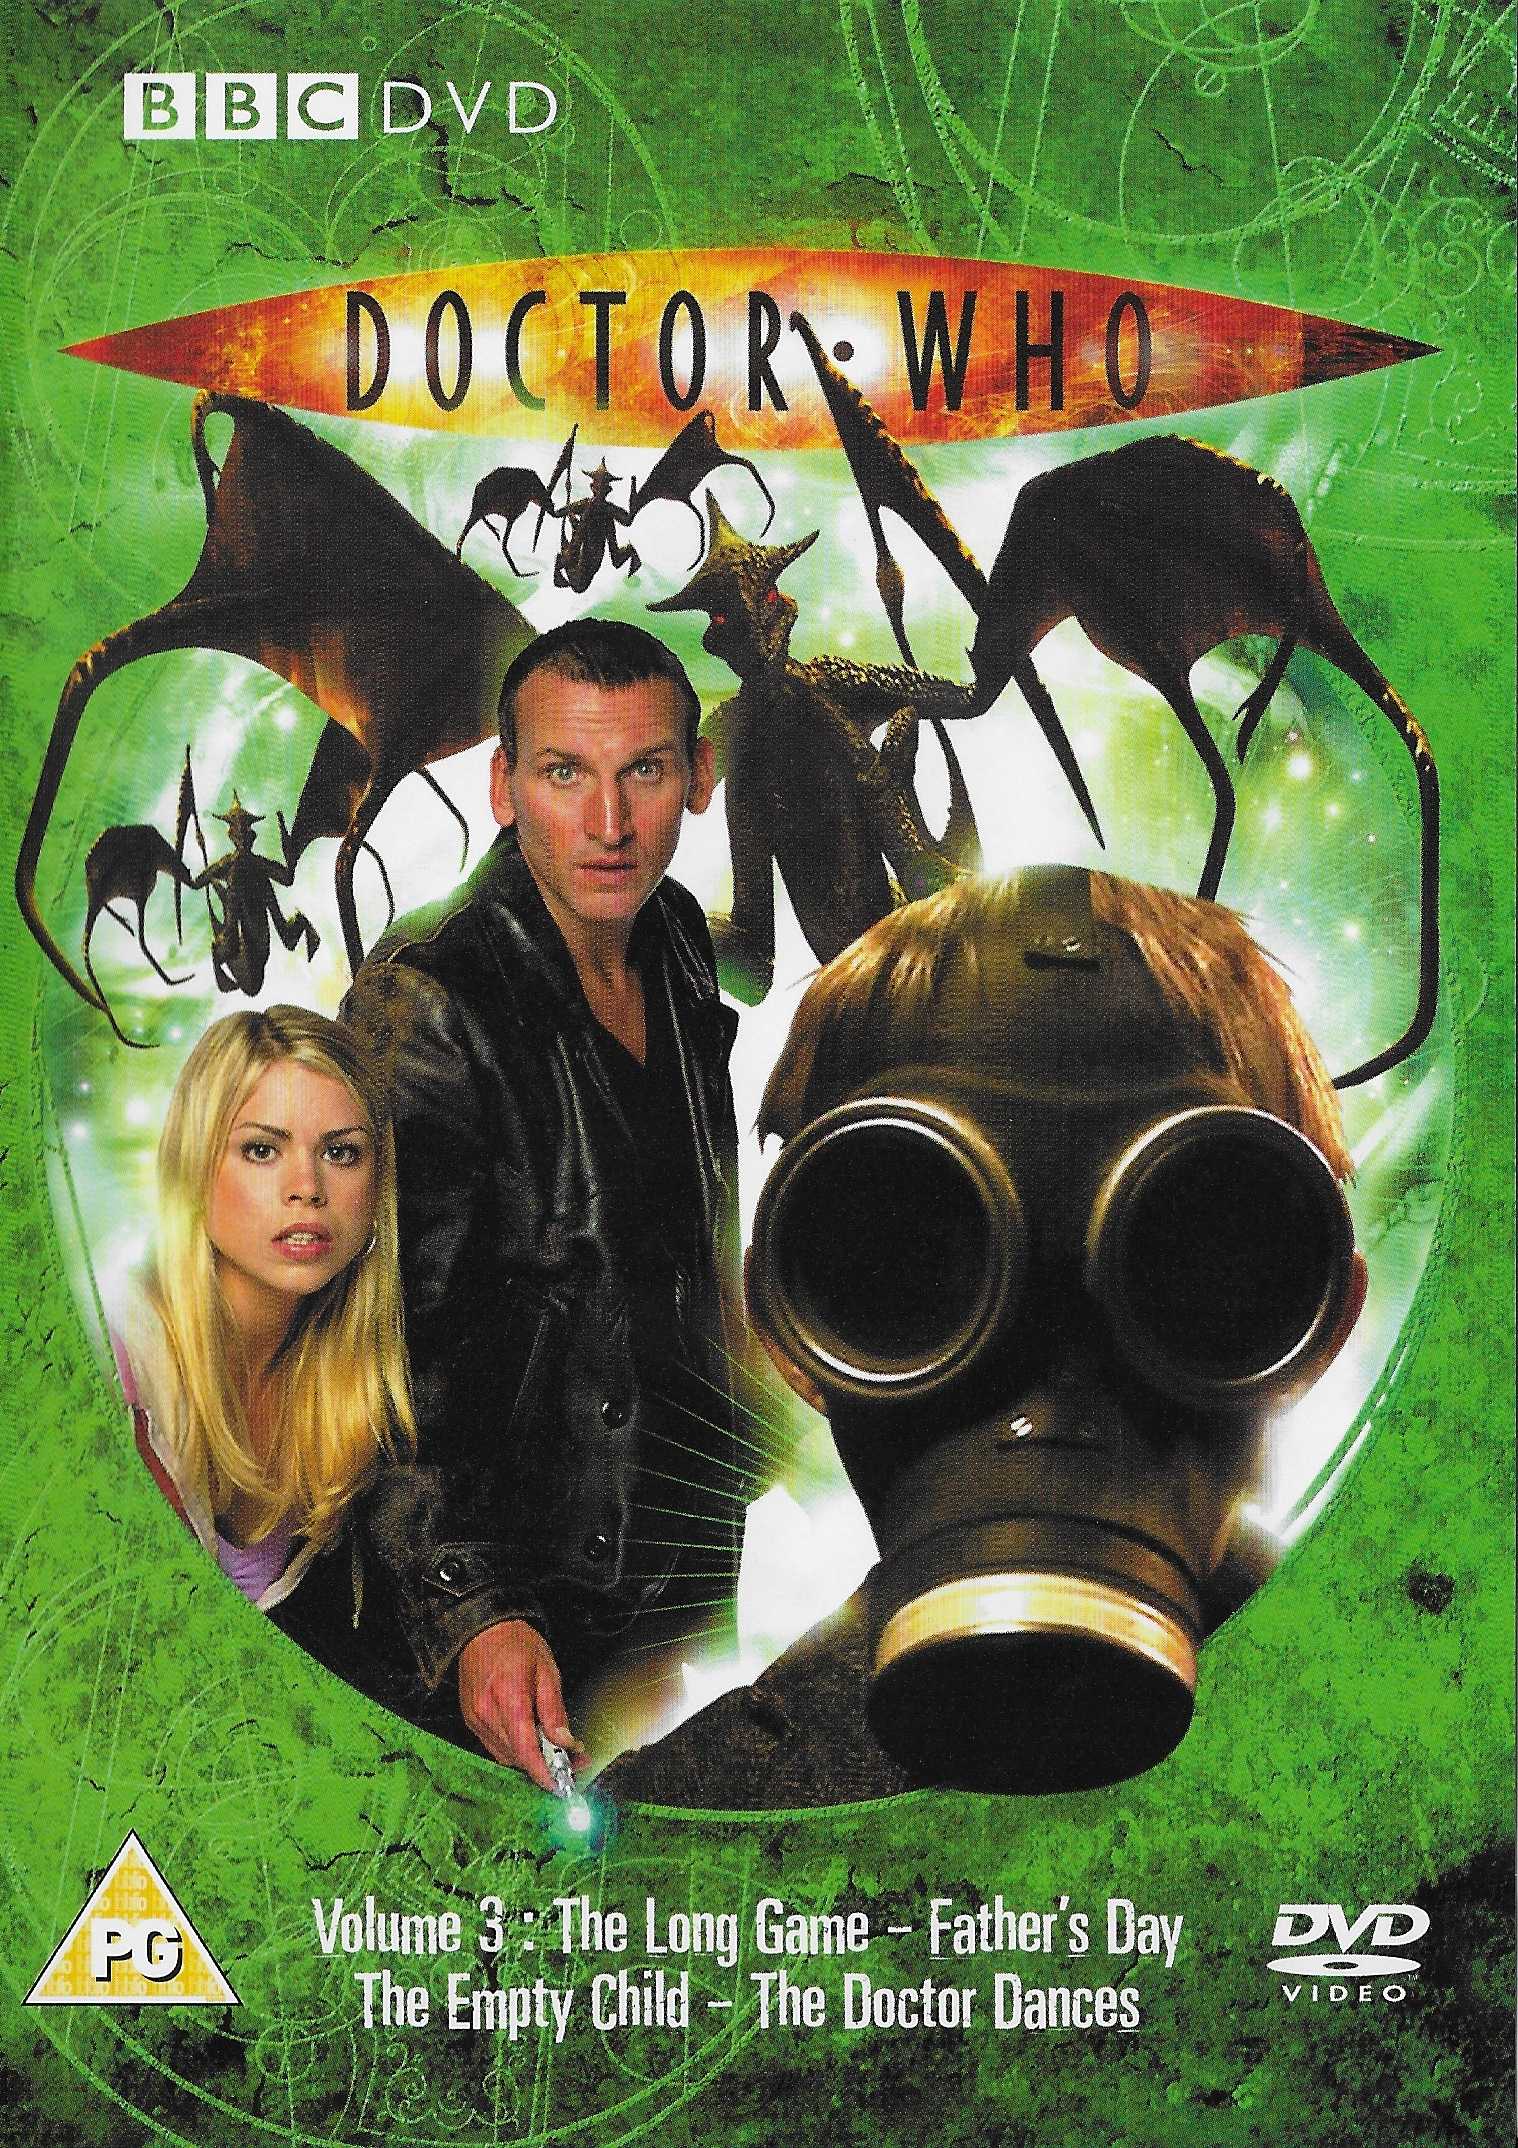 Picture of BBCDVD 1757 Doctor Who - New series, volume 3 by artist Russell T Davies / Paul Cornell / Steven Moffat from the BBC dvds - Records and Tapes library